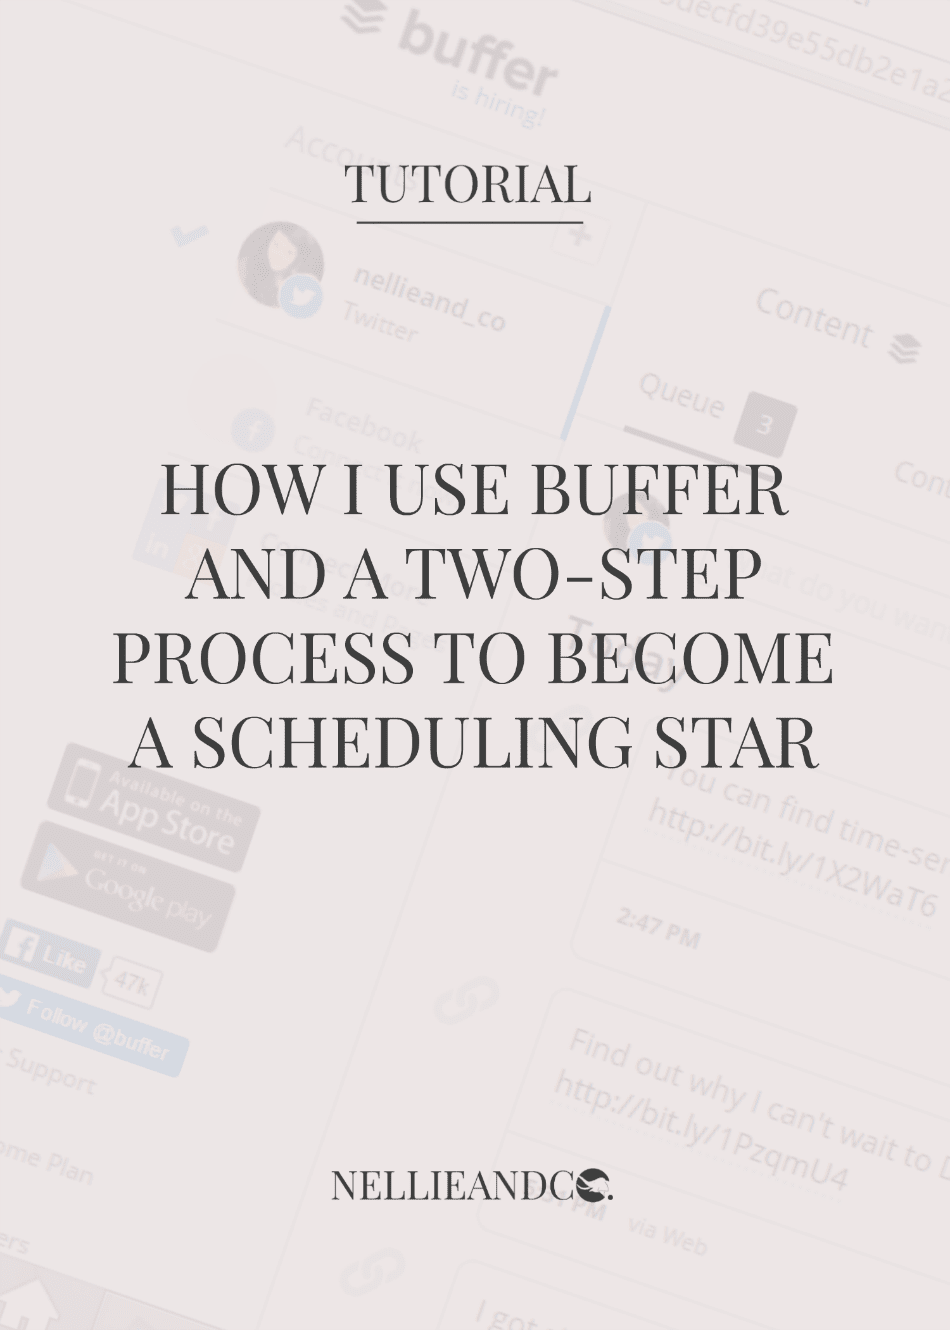 Scheduling posts can be a chore, so do yourself a favour and check out Buffer, a fantastic social media scheduling tool that allows you to prepare and plan your social media updates.